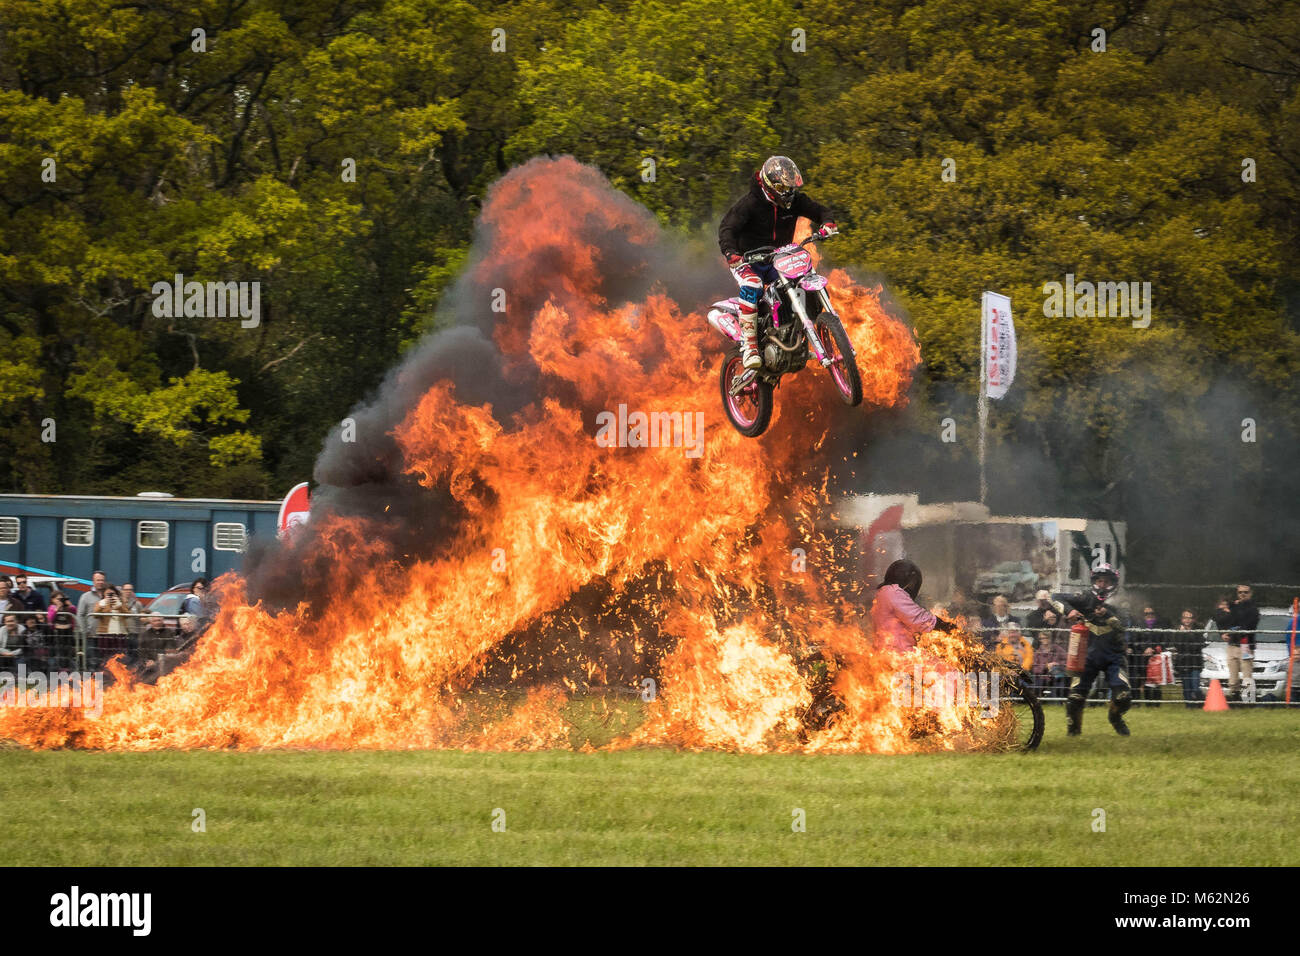 Stunt motocross rider jumping through a ring of fire Stock Photo - Alamy